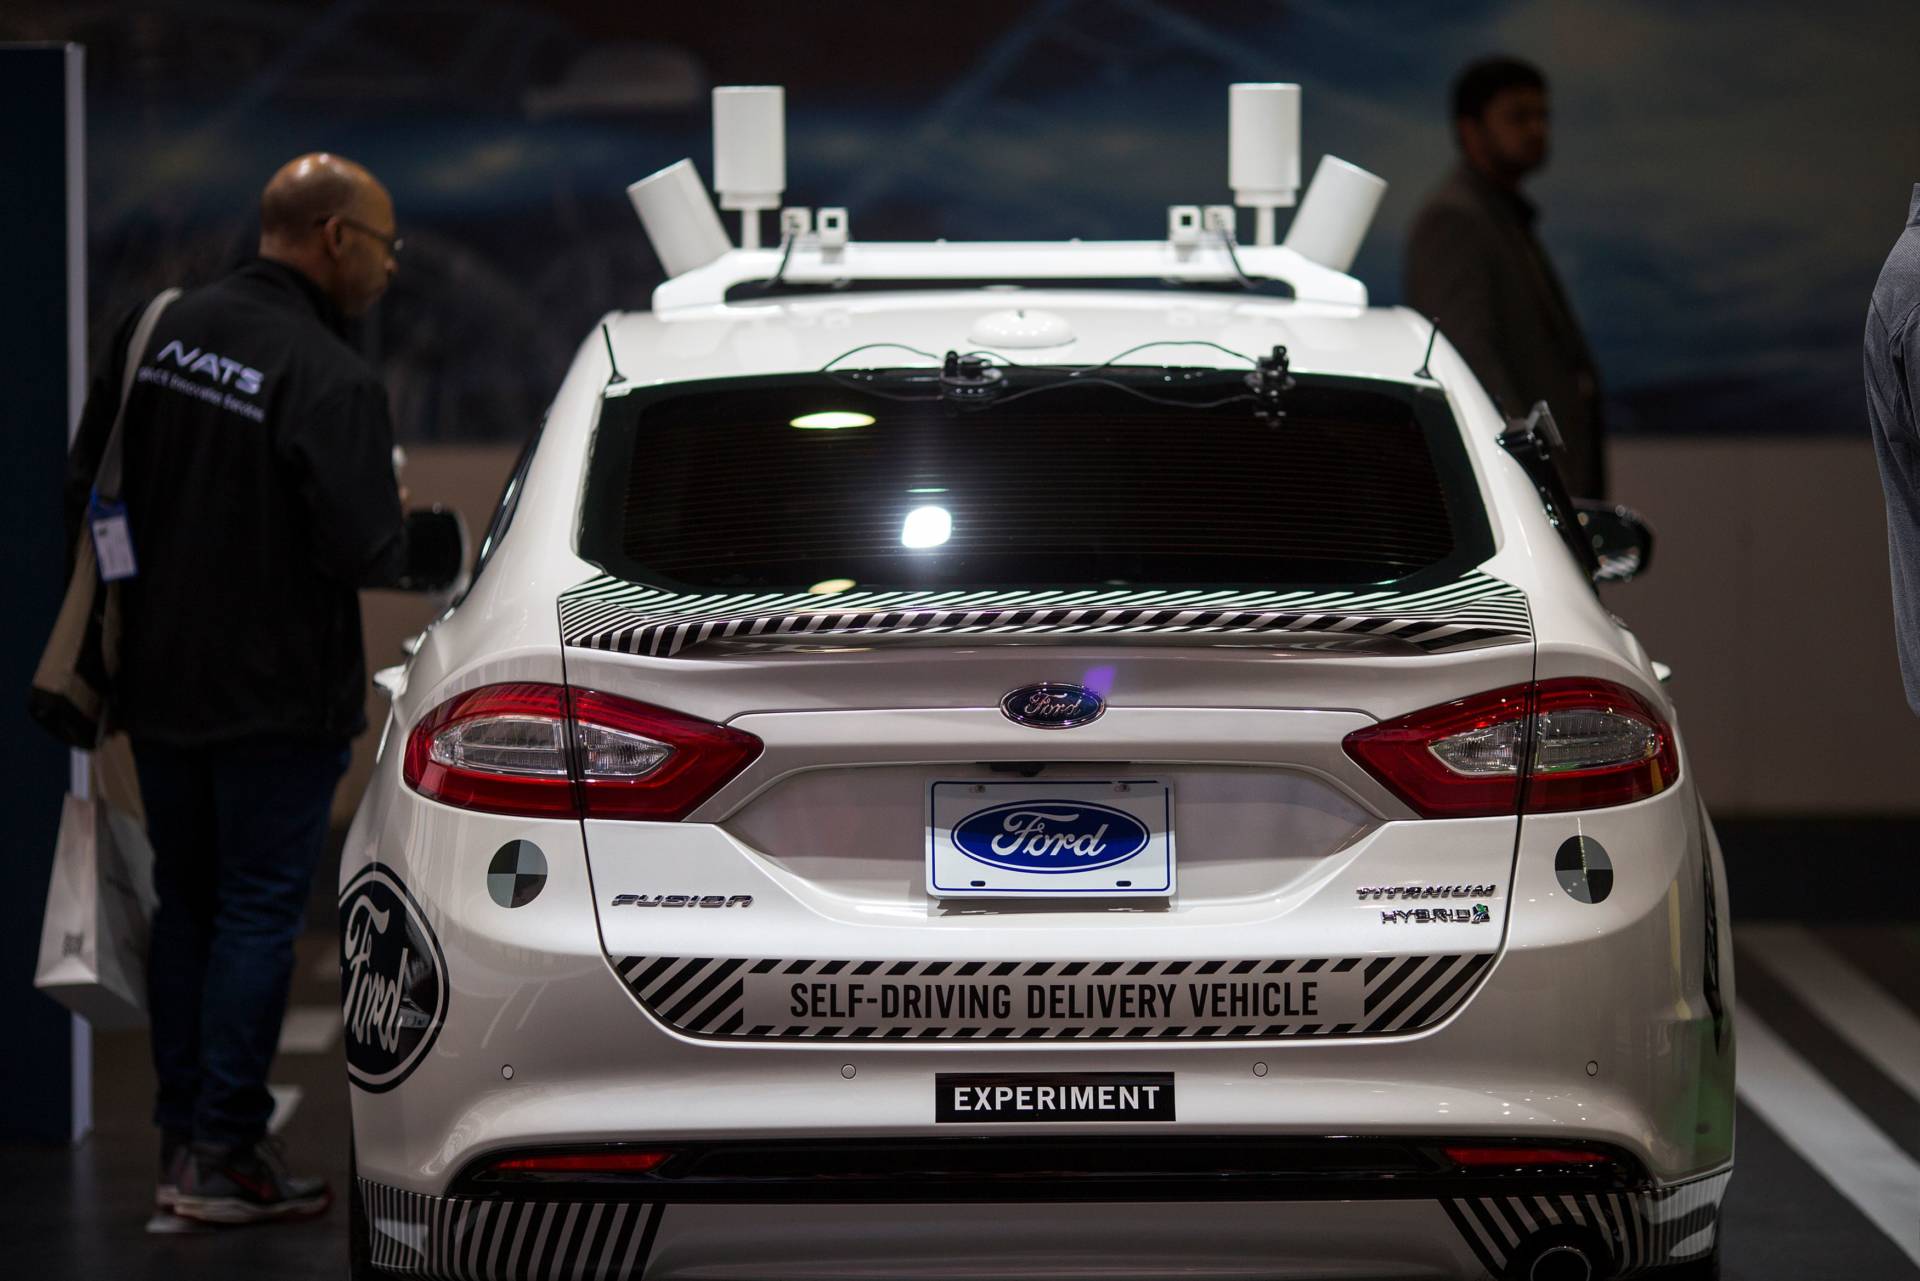 An experimental Ford Fusion self-driving delivery car is displayed at CES in Las Vegas, Nevada. David McNew/AFP/Getty Images